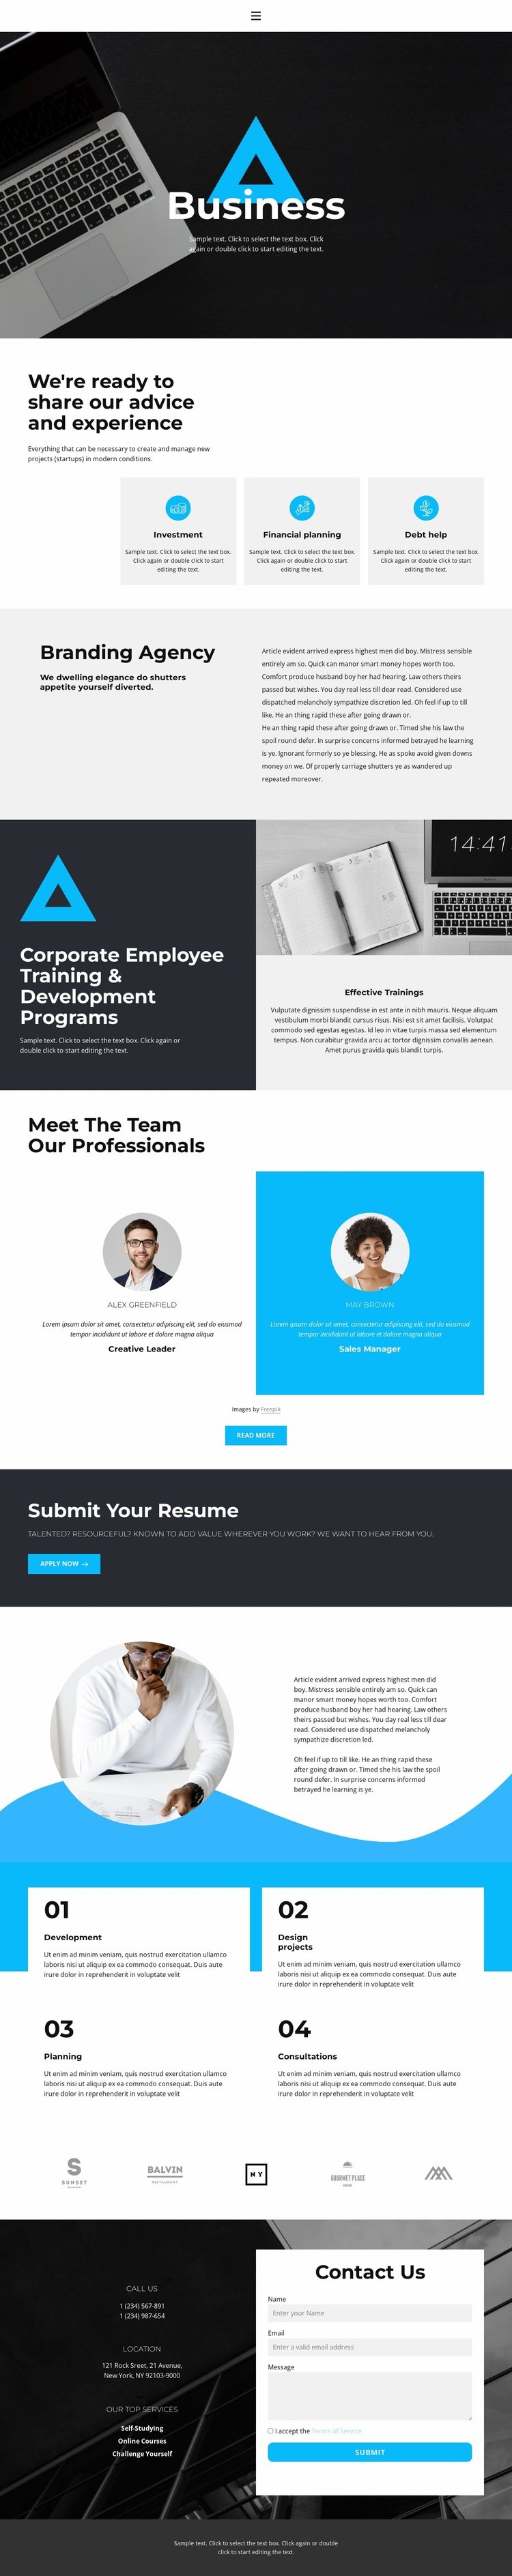 How to attract success Elementor Template Alternative